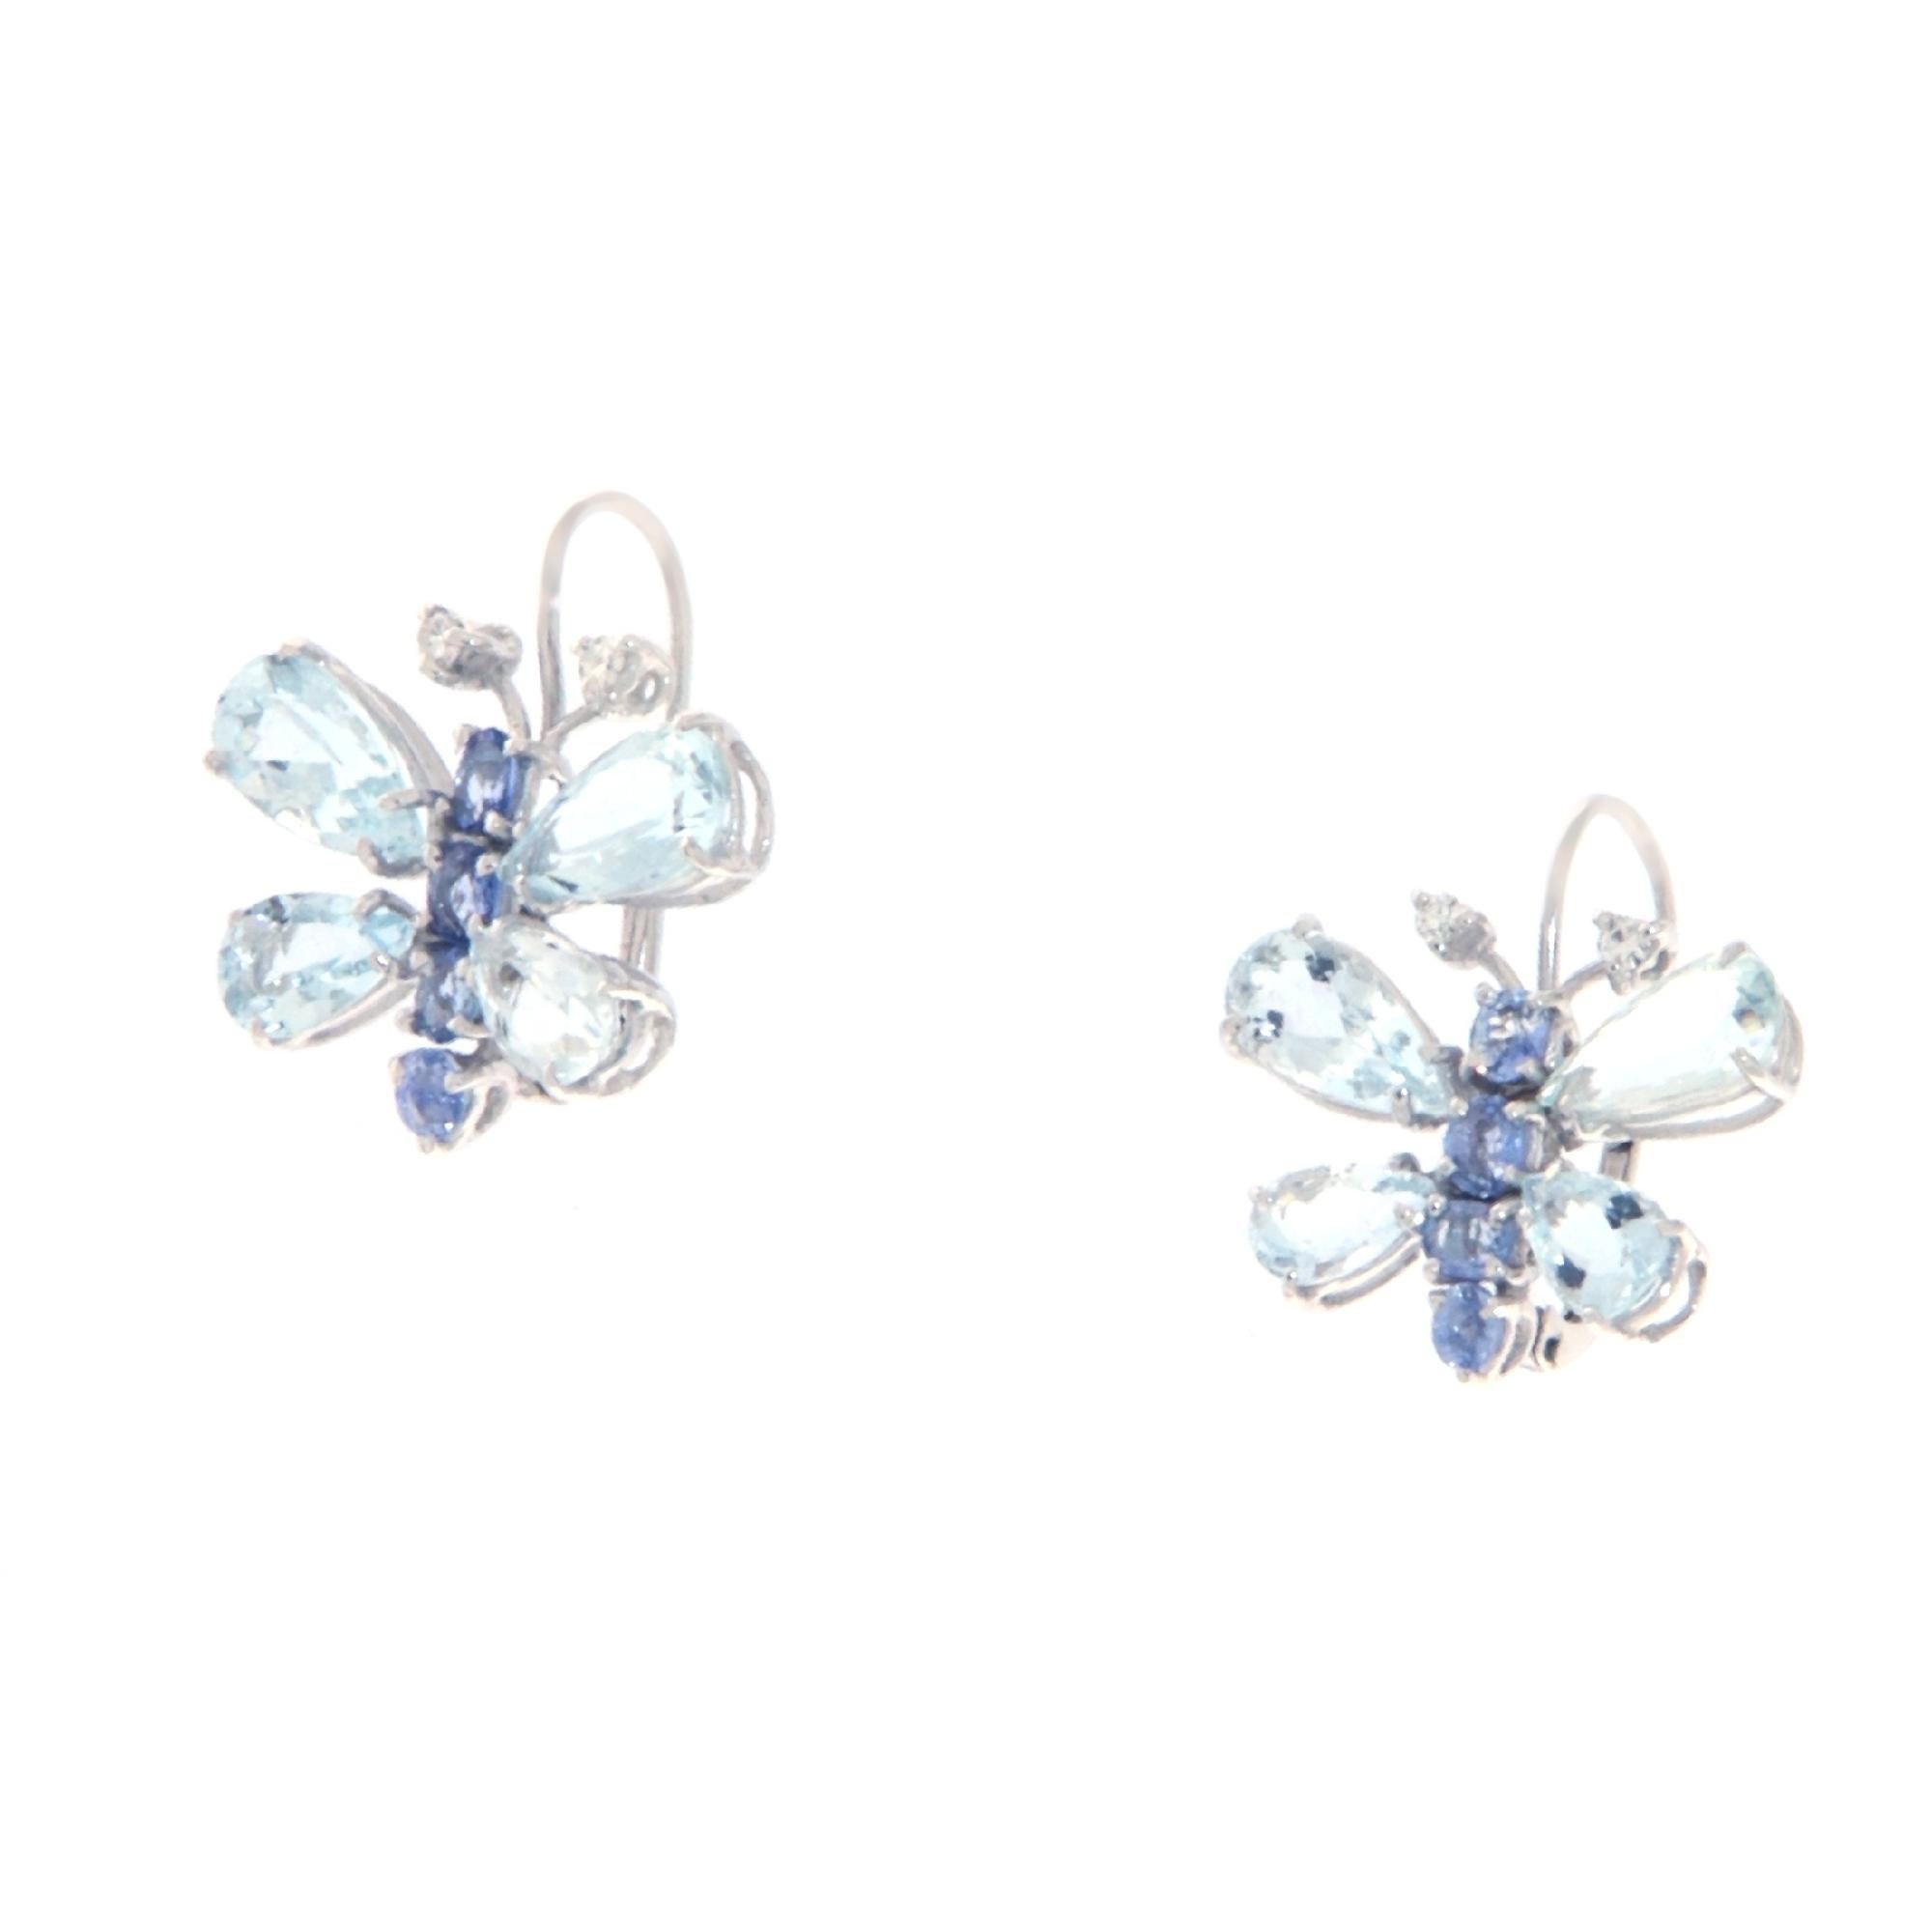 These extraordinary butterfly-shaped earrings, masterfully crafted in 18-karat white gold, are a hymn to the beauty and elegance of nature, paired with the mastery of jewelry art. The choice of white gold, with its brilliance and purity, creates a